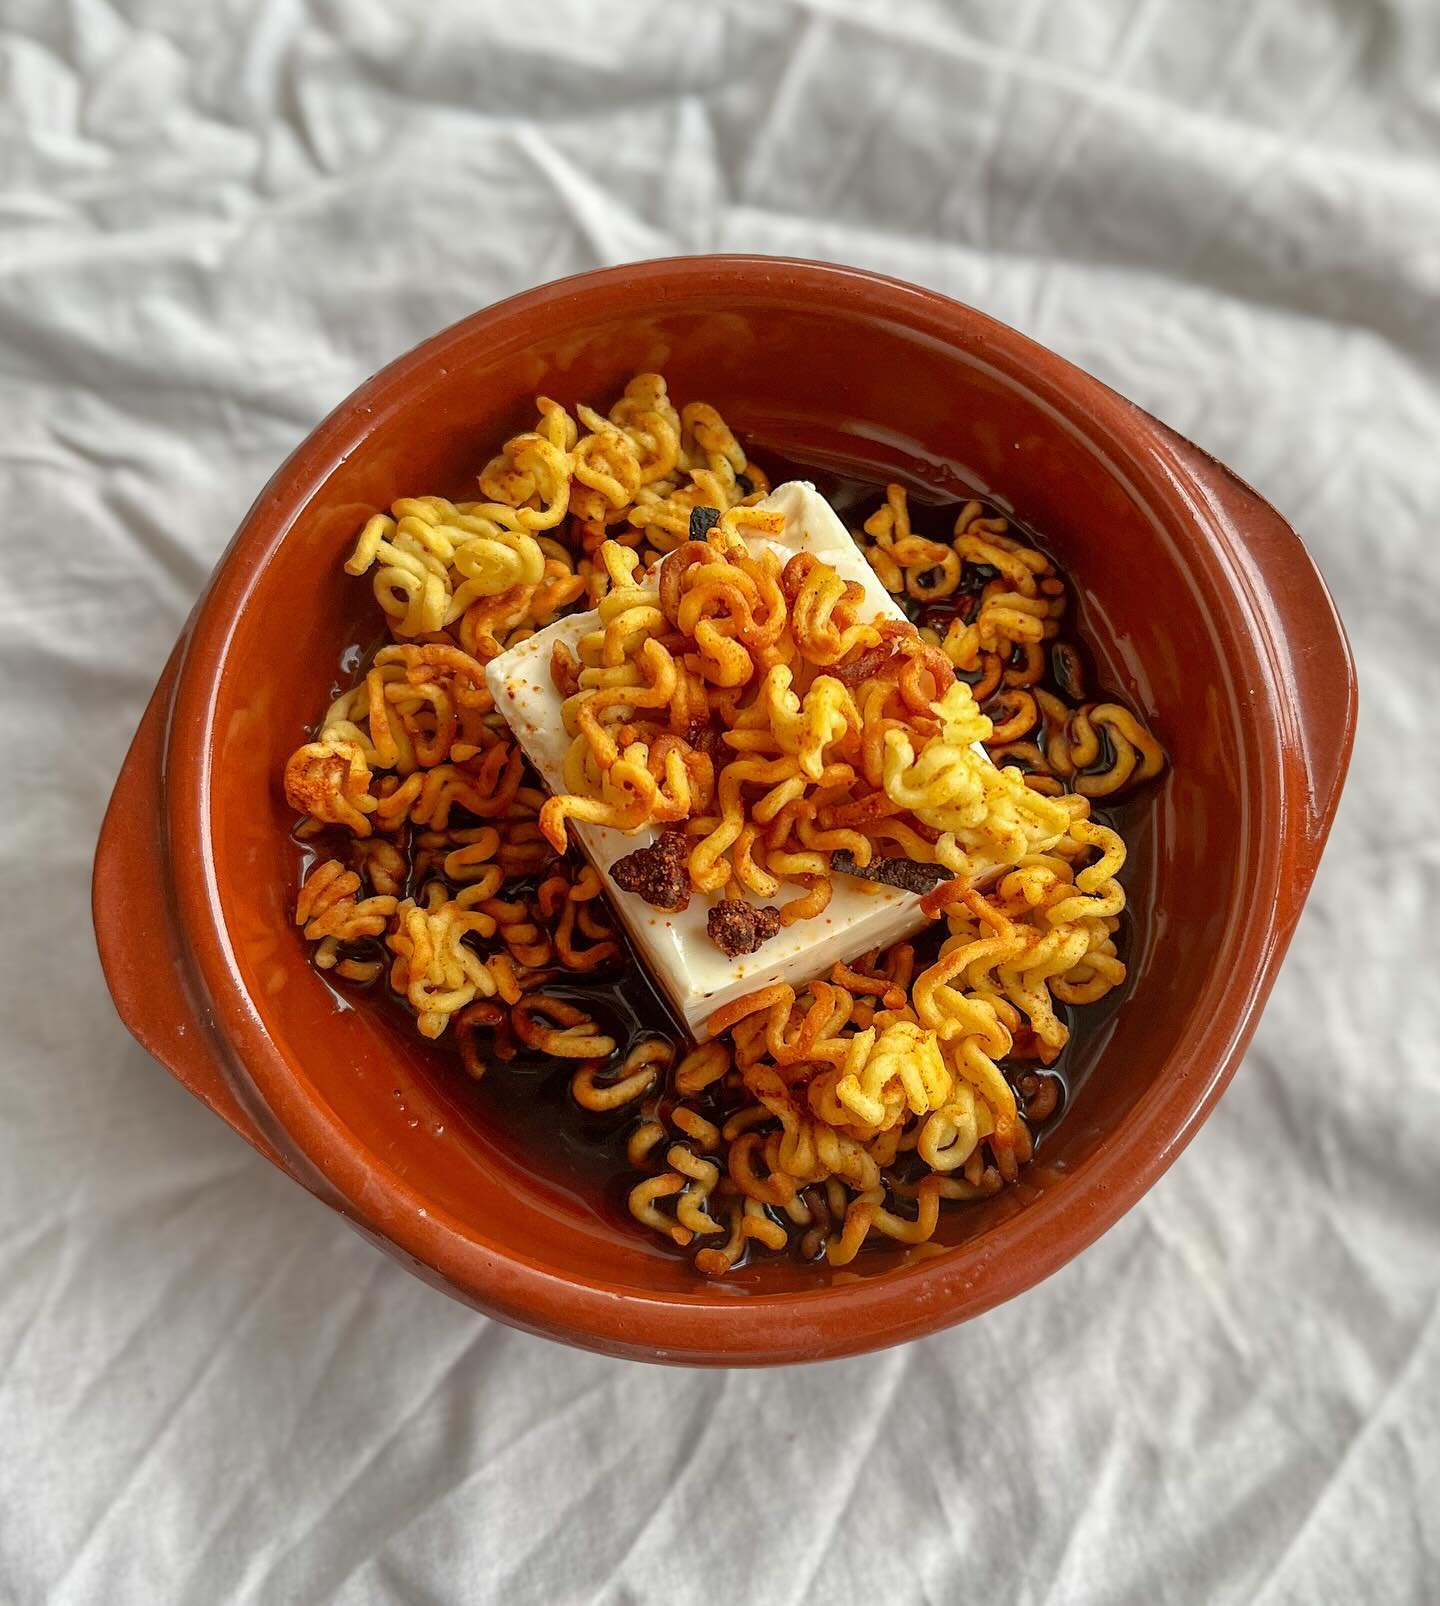 some supper club recipe testing recently: 

🍜 chilled tofu, ponzu, crispy fried ramyun 🍜
cool silken tofu sitting in a fresh and tangy ponzu, topped with crispy fried, salty &amp; savoury ramyun

🌶️ gochujang tteok-kkochi 🌶️
lightly charred chewy